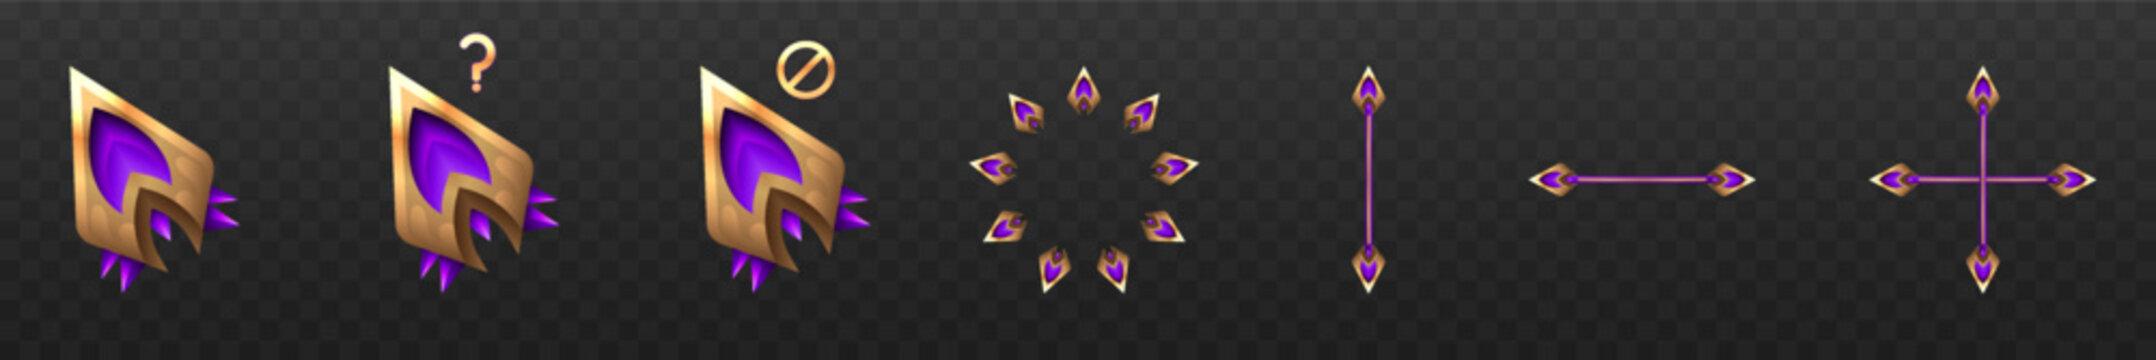 Fantasy Gold and Purple Custom Gaming Mouse Cursor Icons Set for Game UI Designs